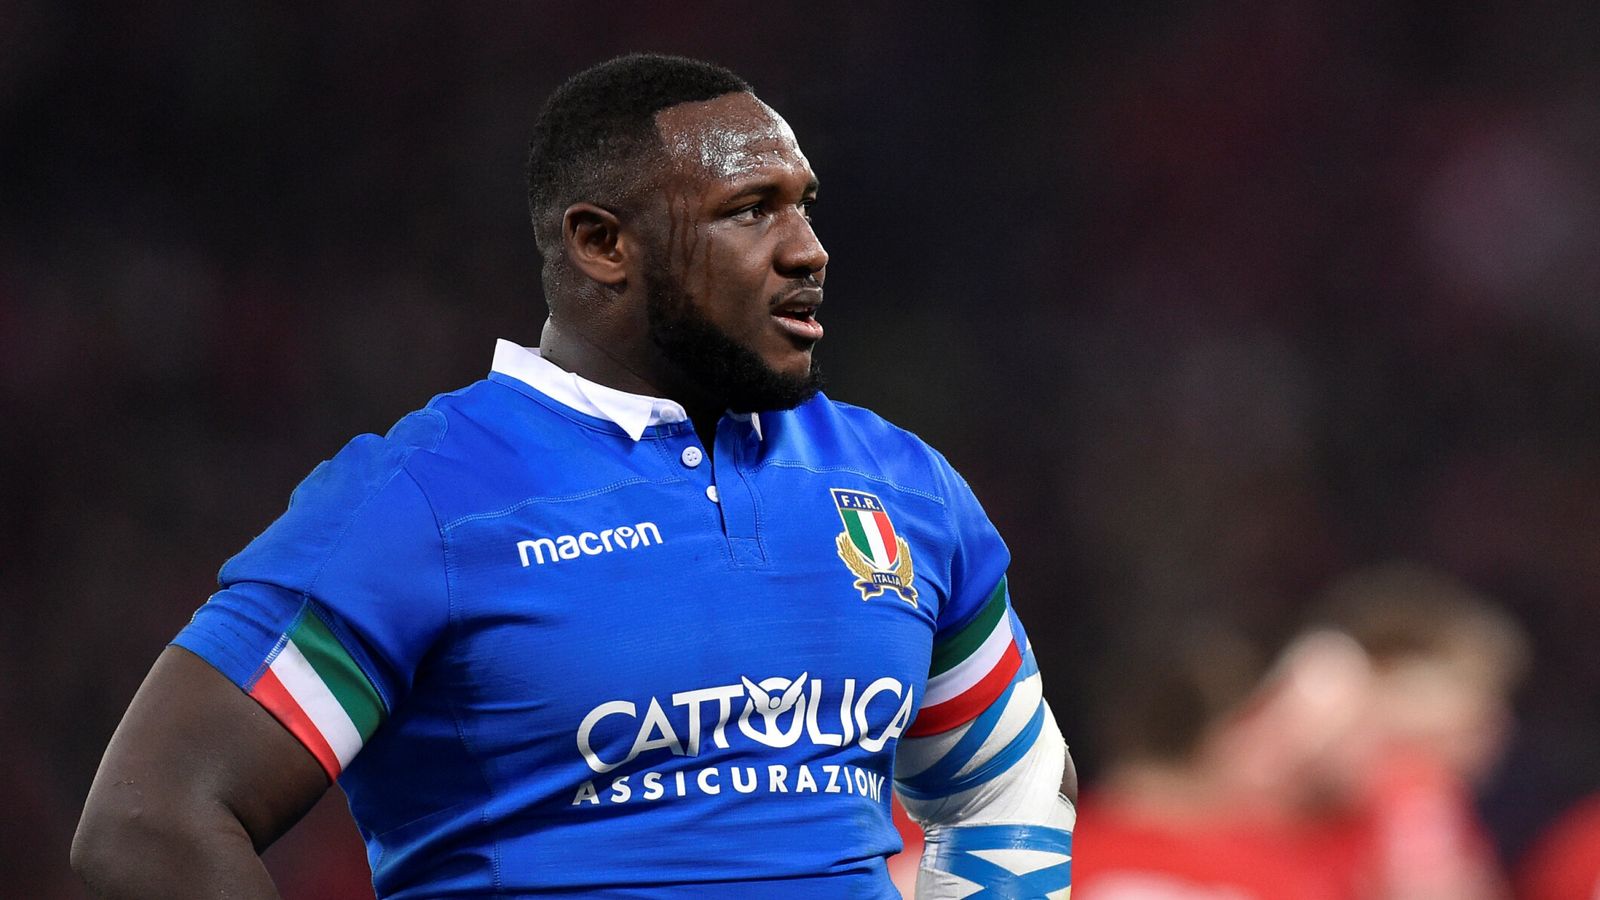 Cherif Traore: Guinea-born Italian rugby star says 'I want to forgive' as he accepts apology after being given rotten banana in club's Secret Santa